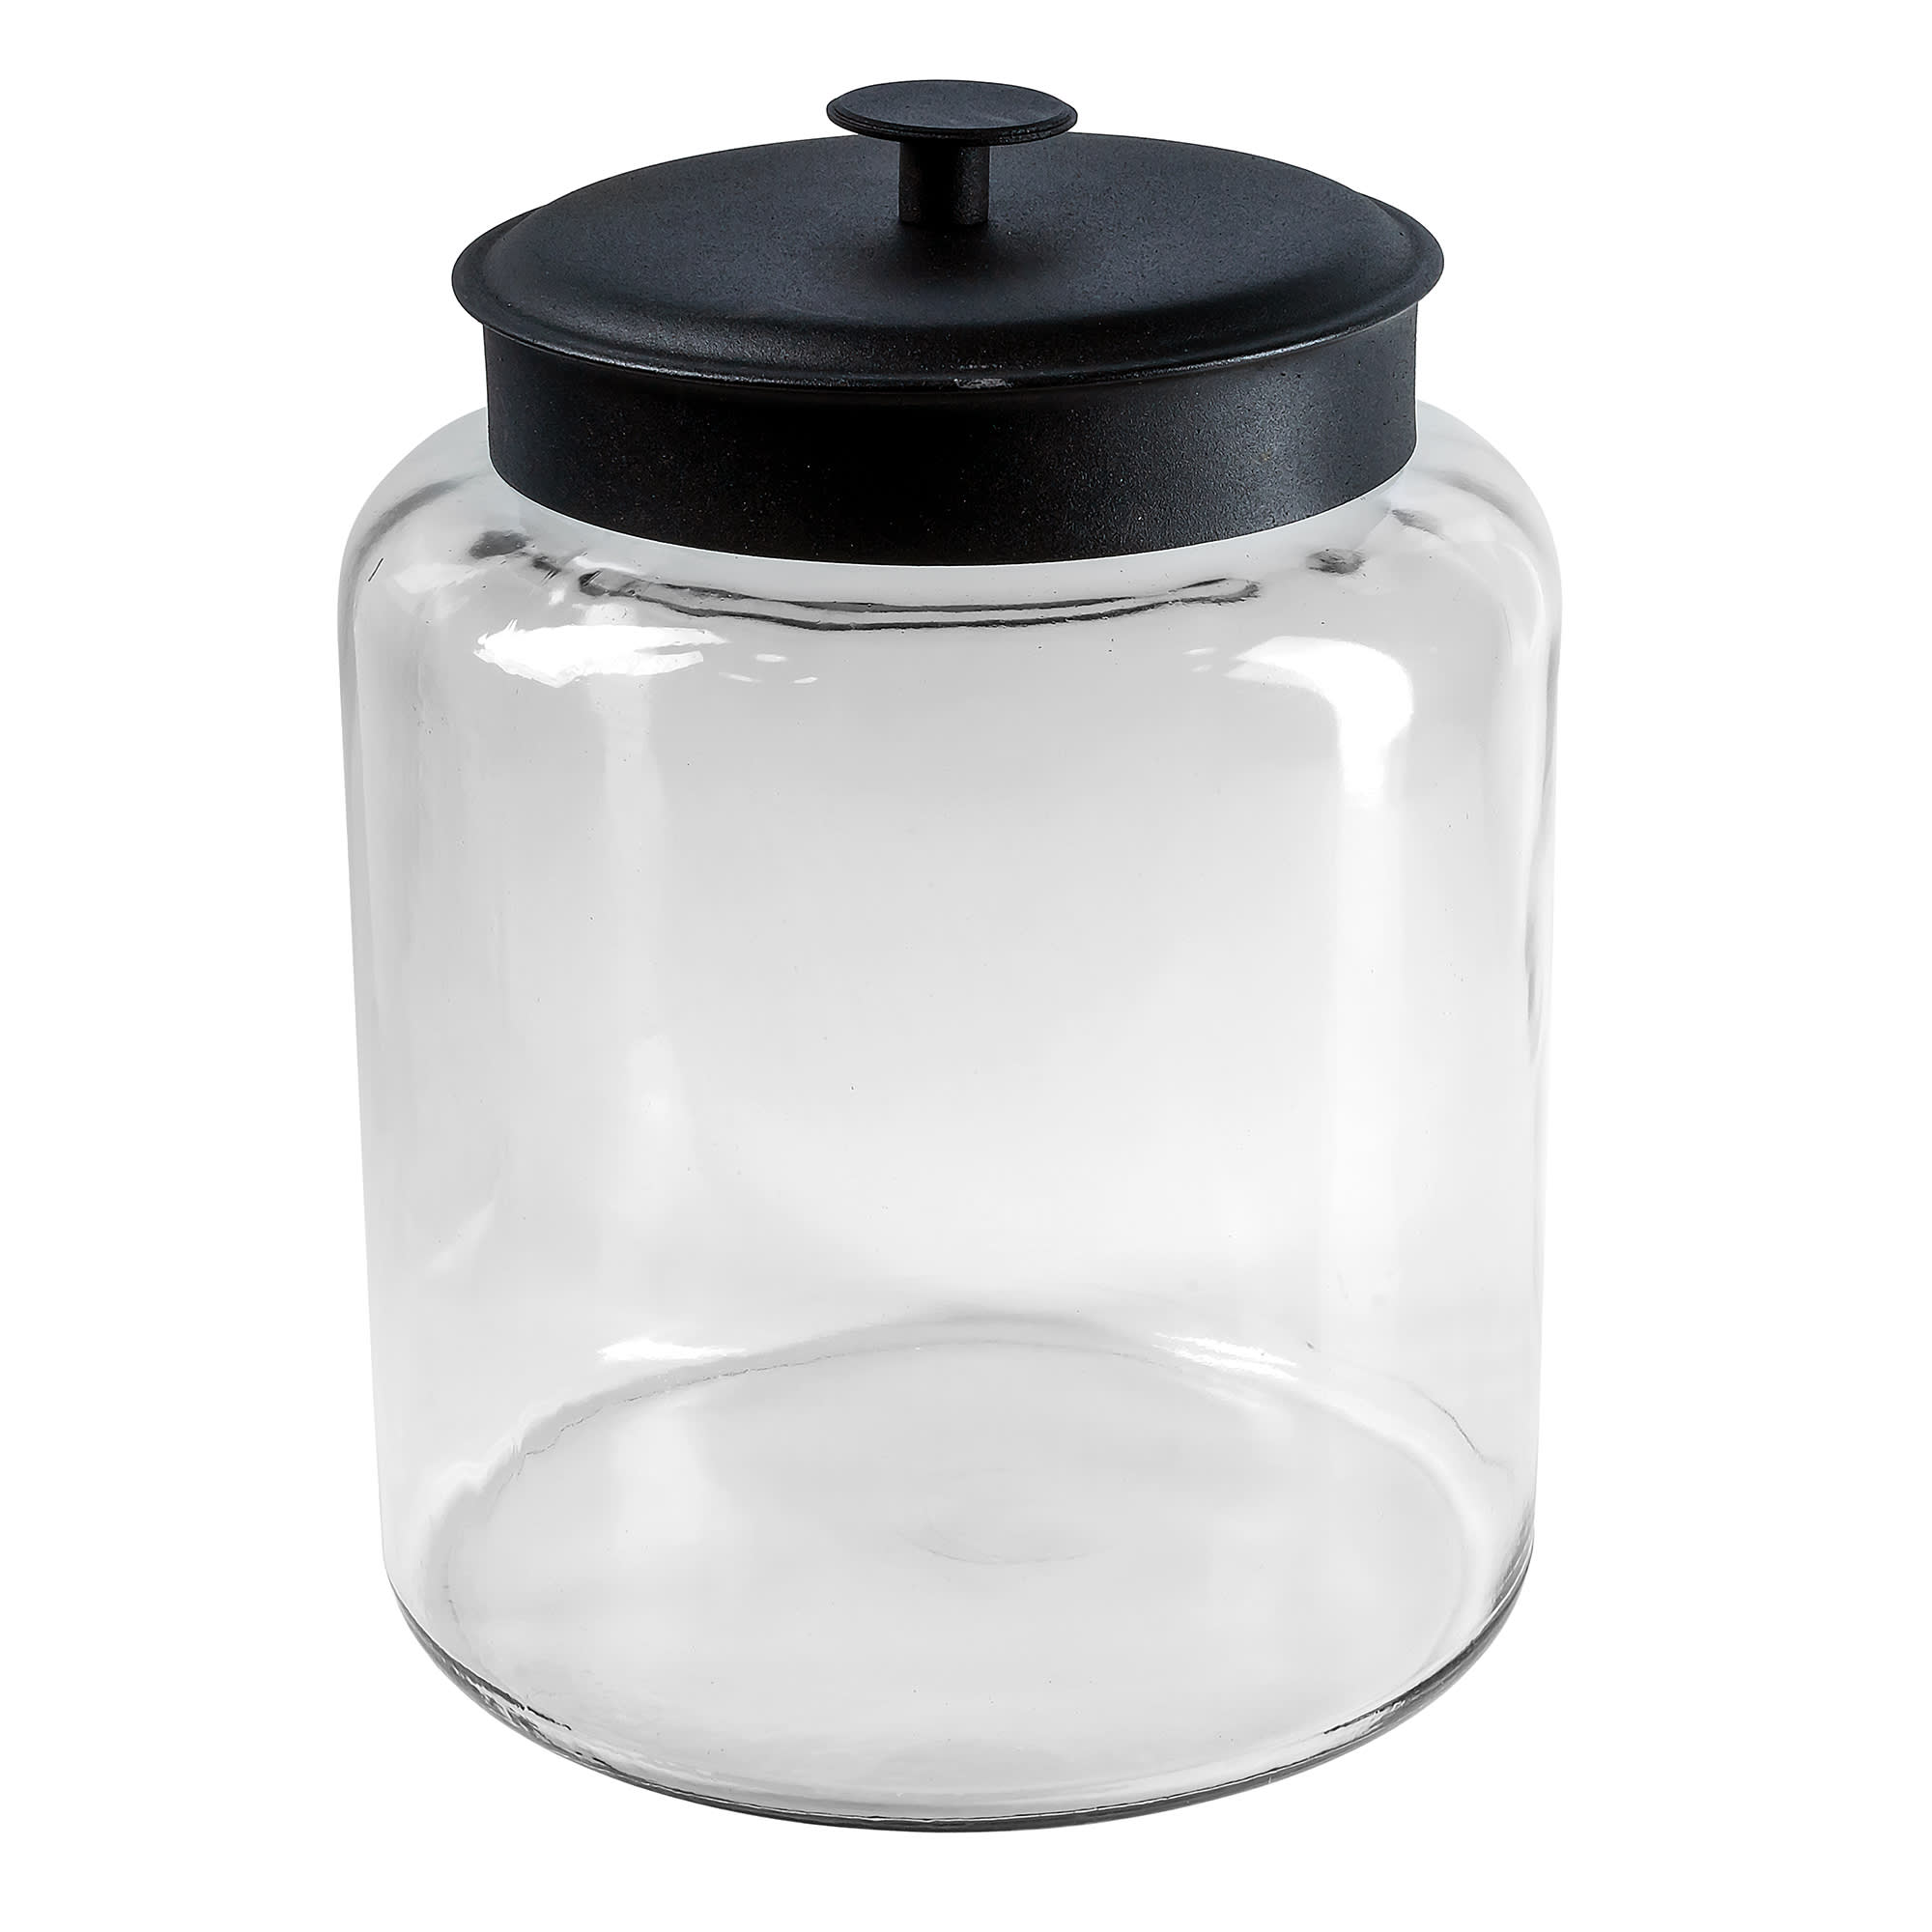 2.5 Gallon Montana Glass Jar w/Lid, Glass Container